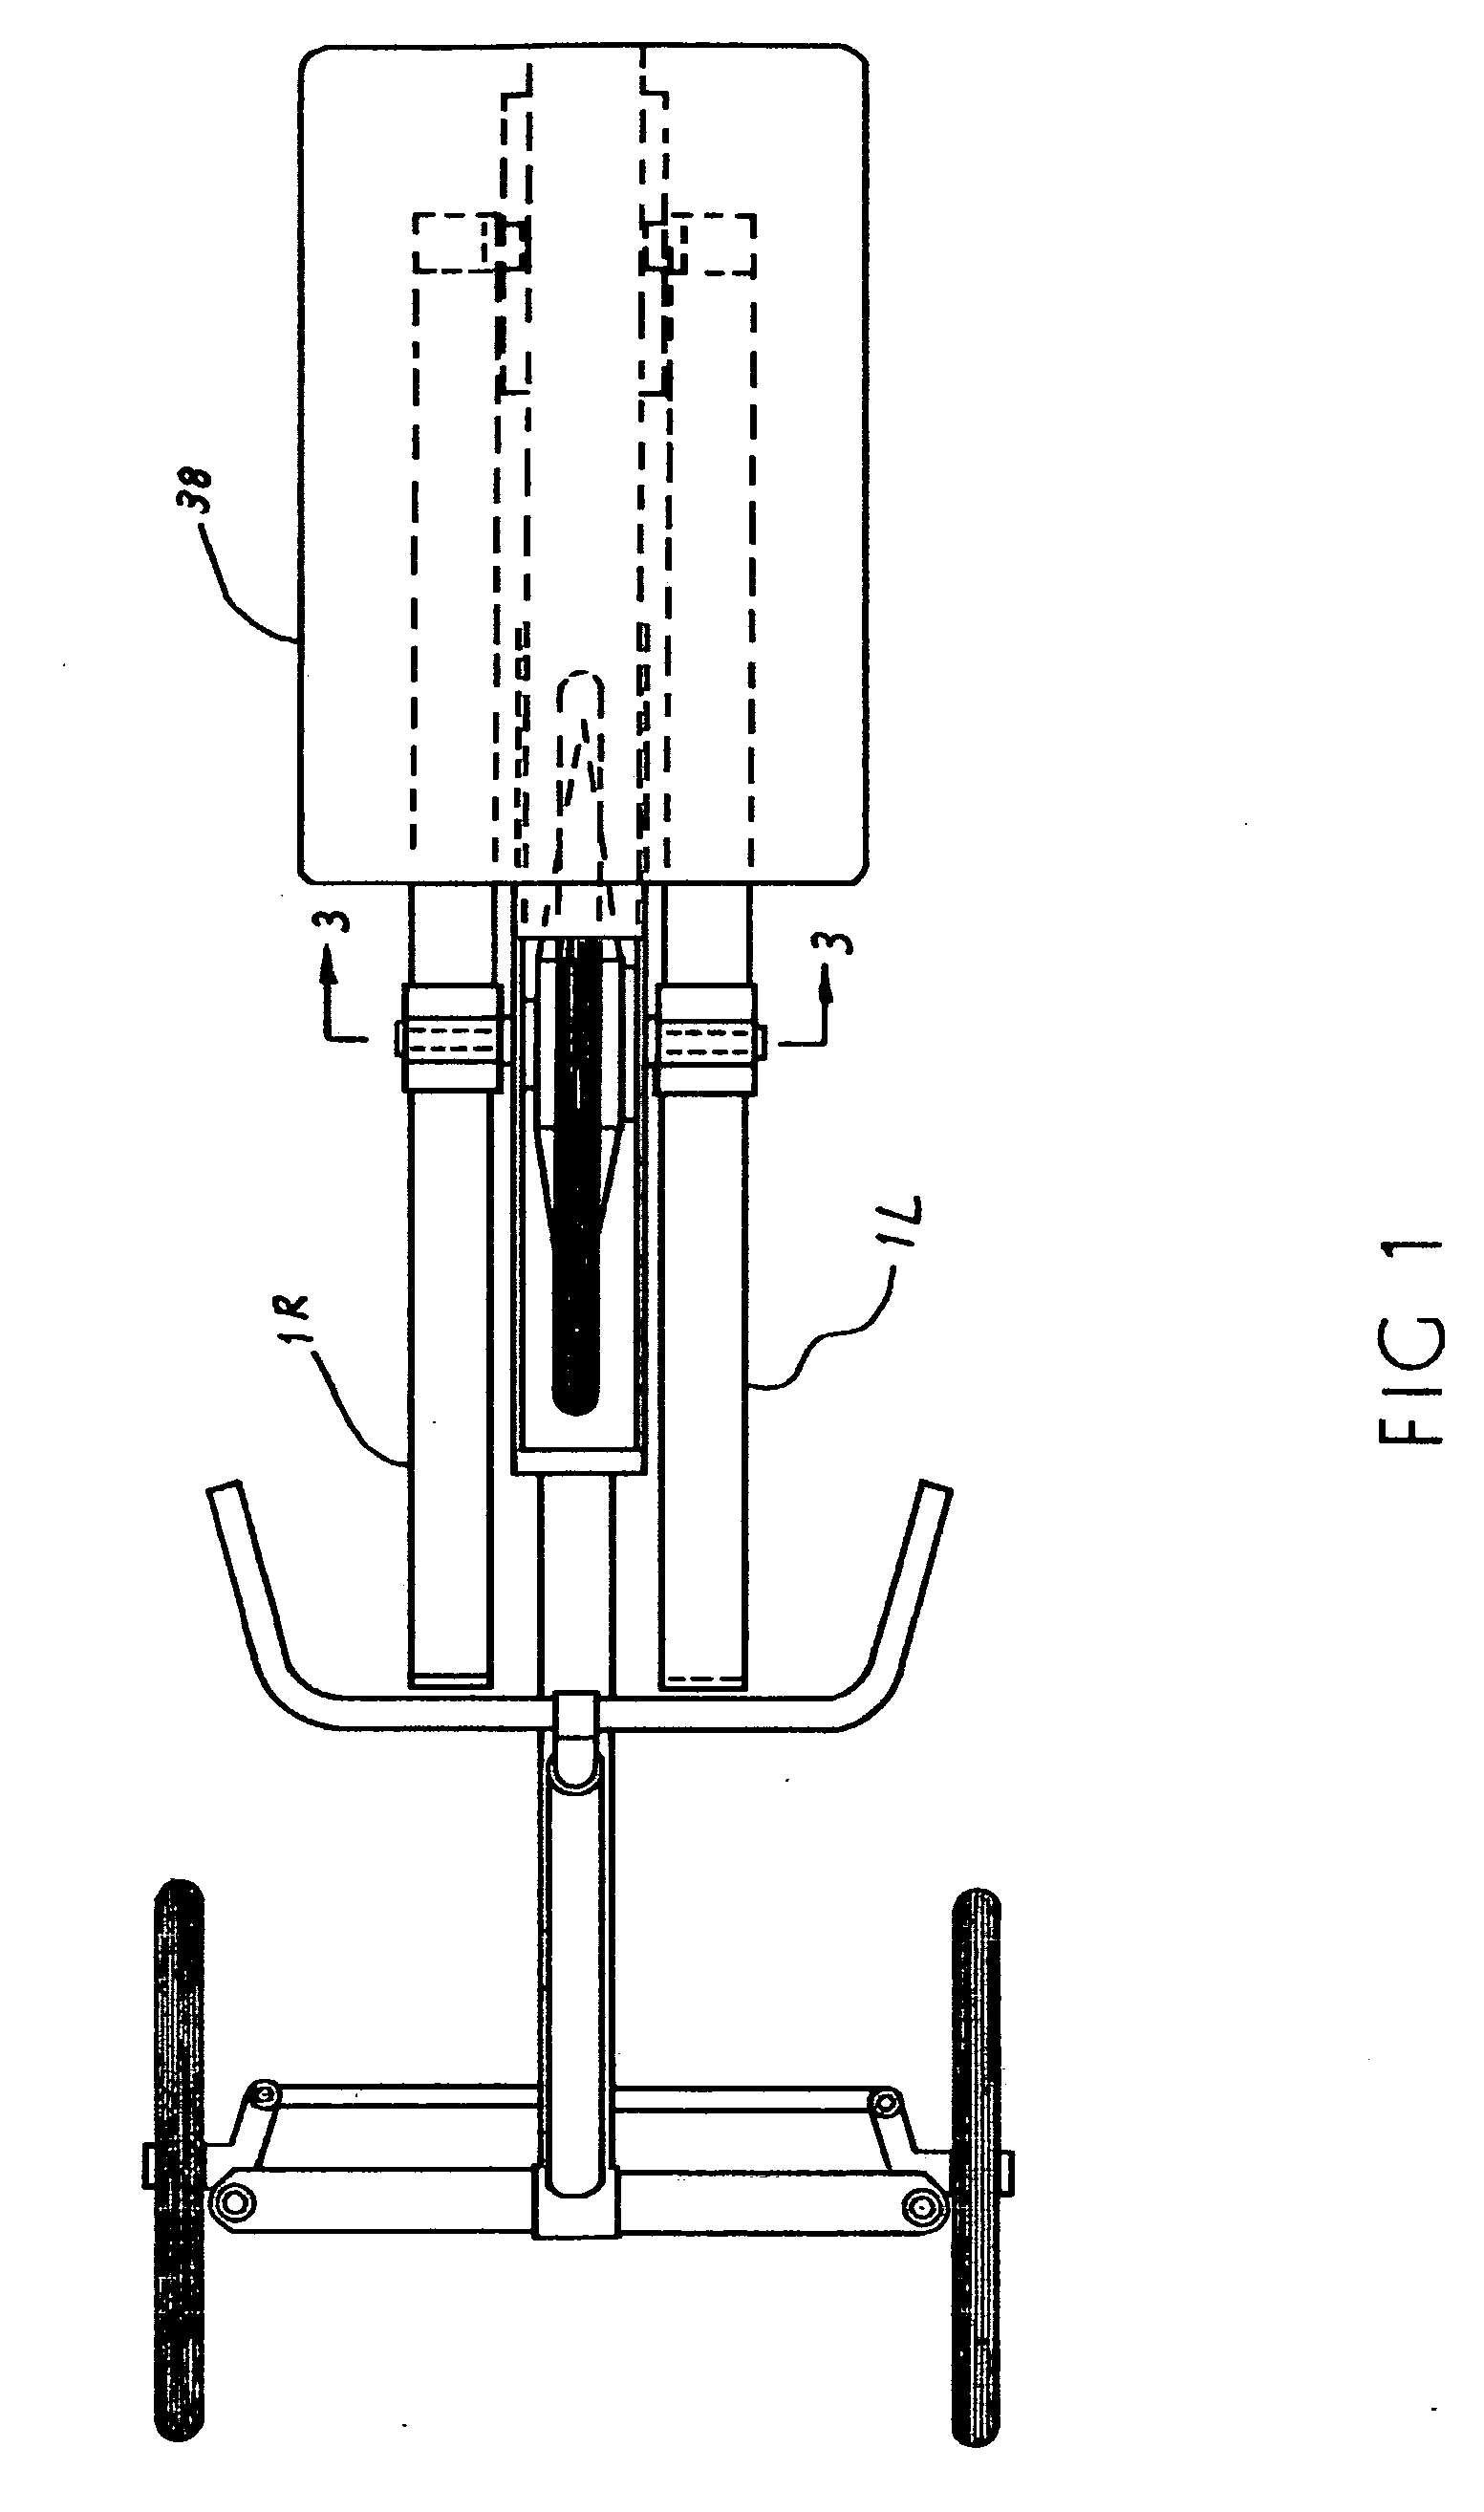 Multiple speed chainless drive for a utility tricycle with either torque amplifying pedal beams or a conventional bicycle seat and pedals